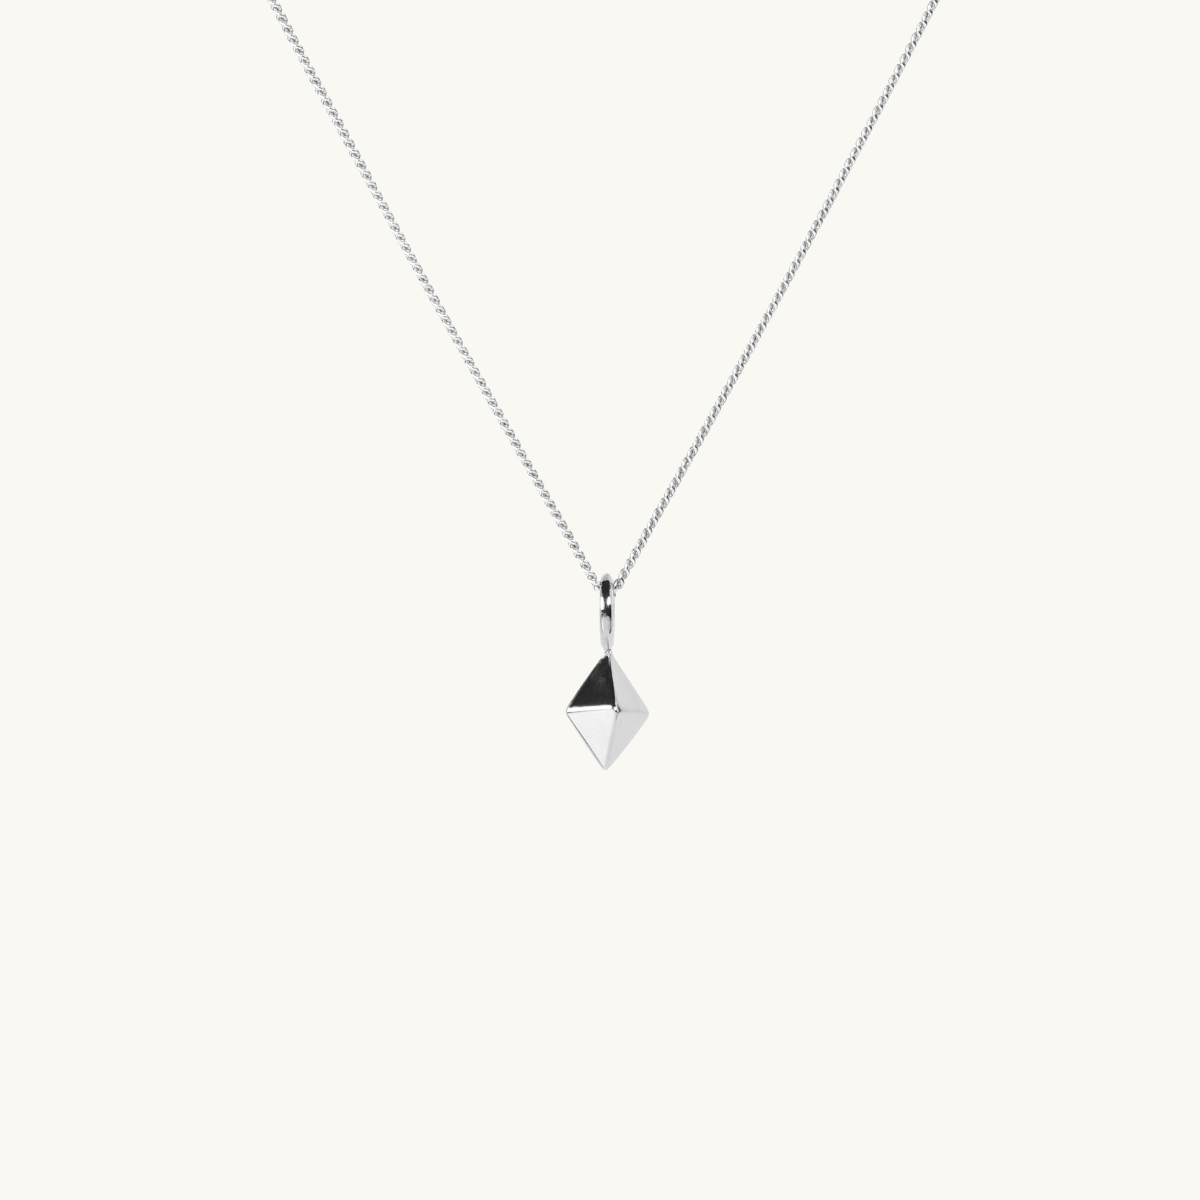 Necklace pendant small diamond ppg silver charity